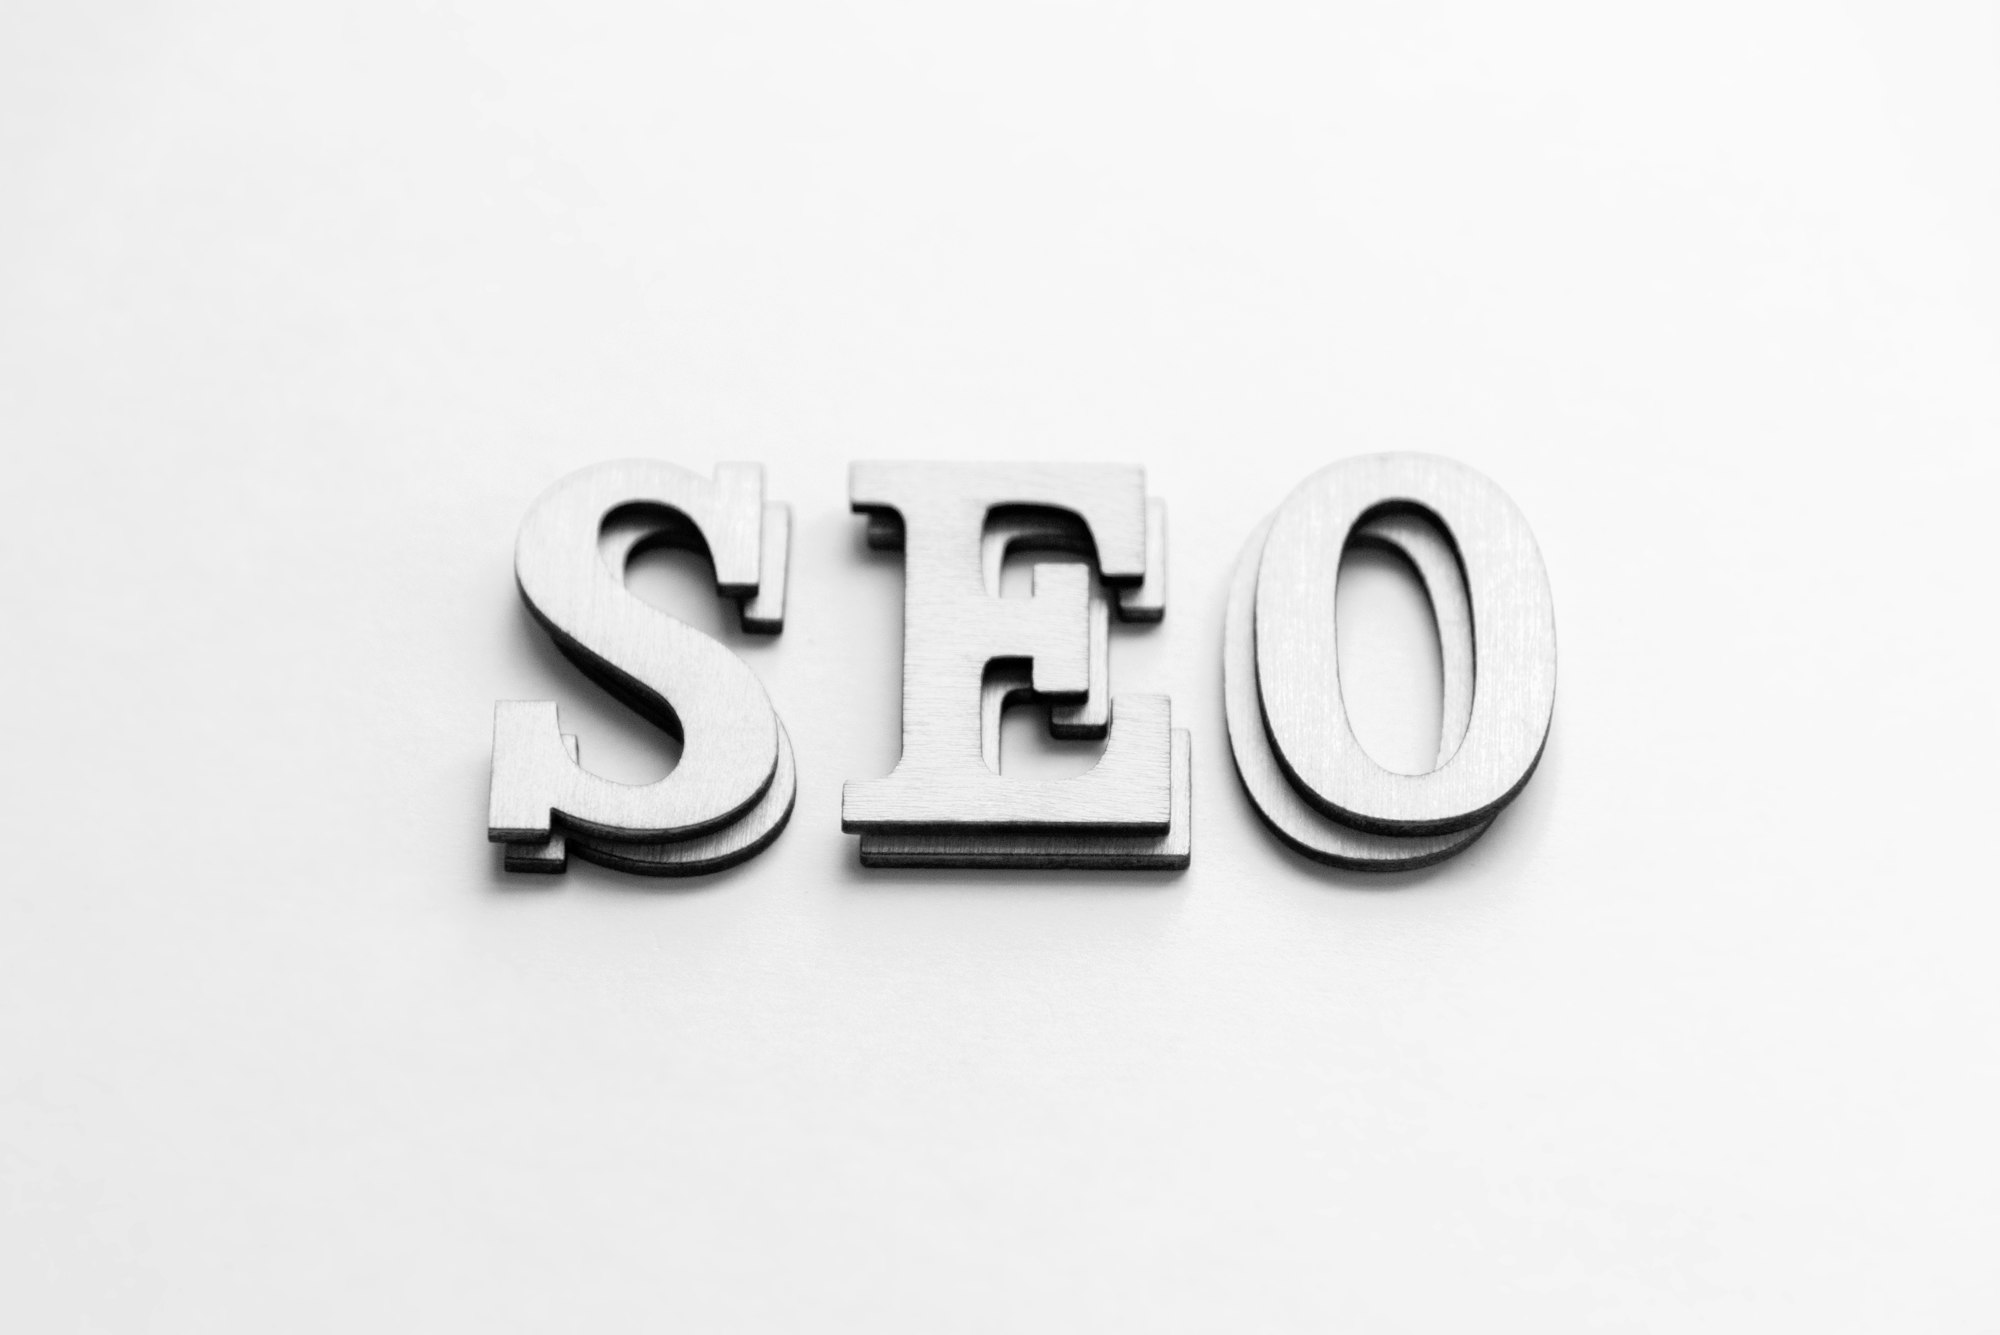 Search Engine Optimization (SEO) And The Web